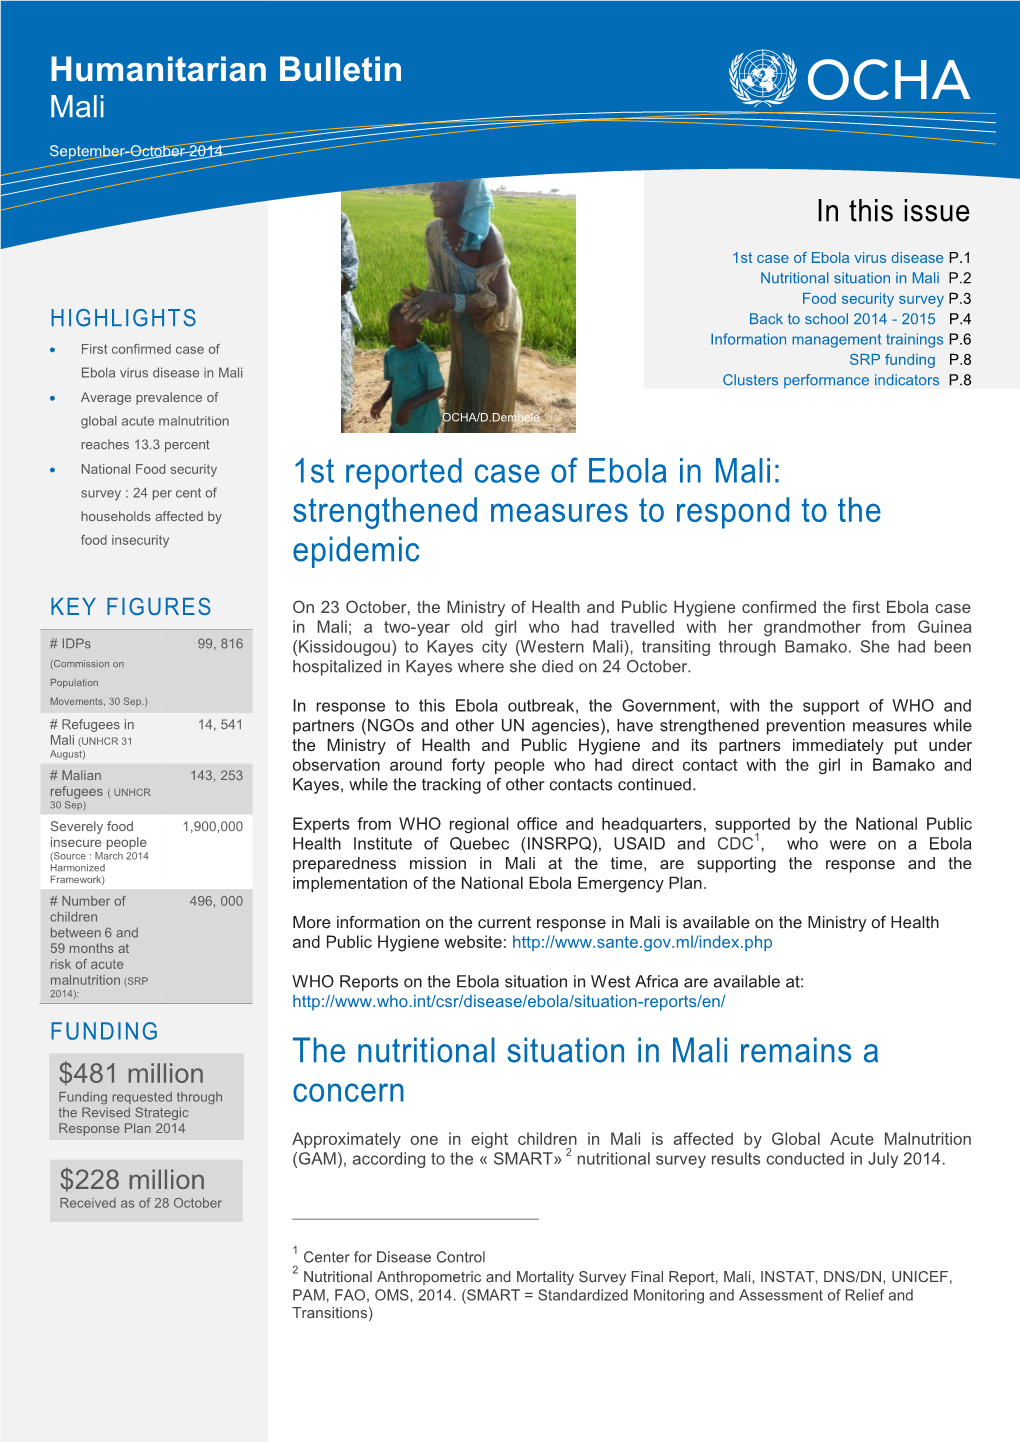 1St Reported Case of Ebola in Mali: Strengthened Measures to Respond